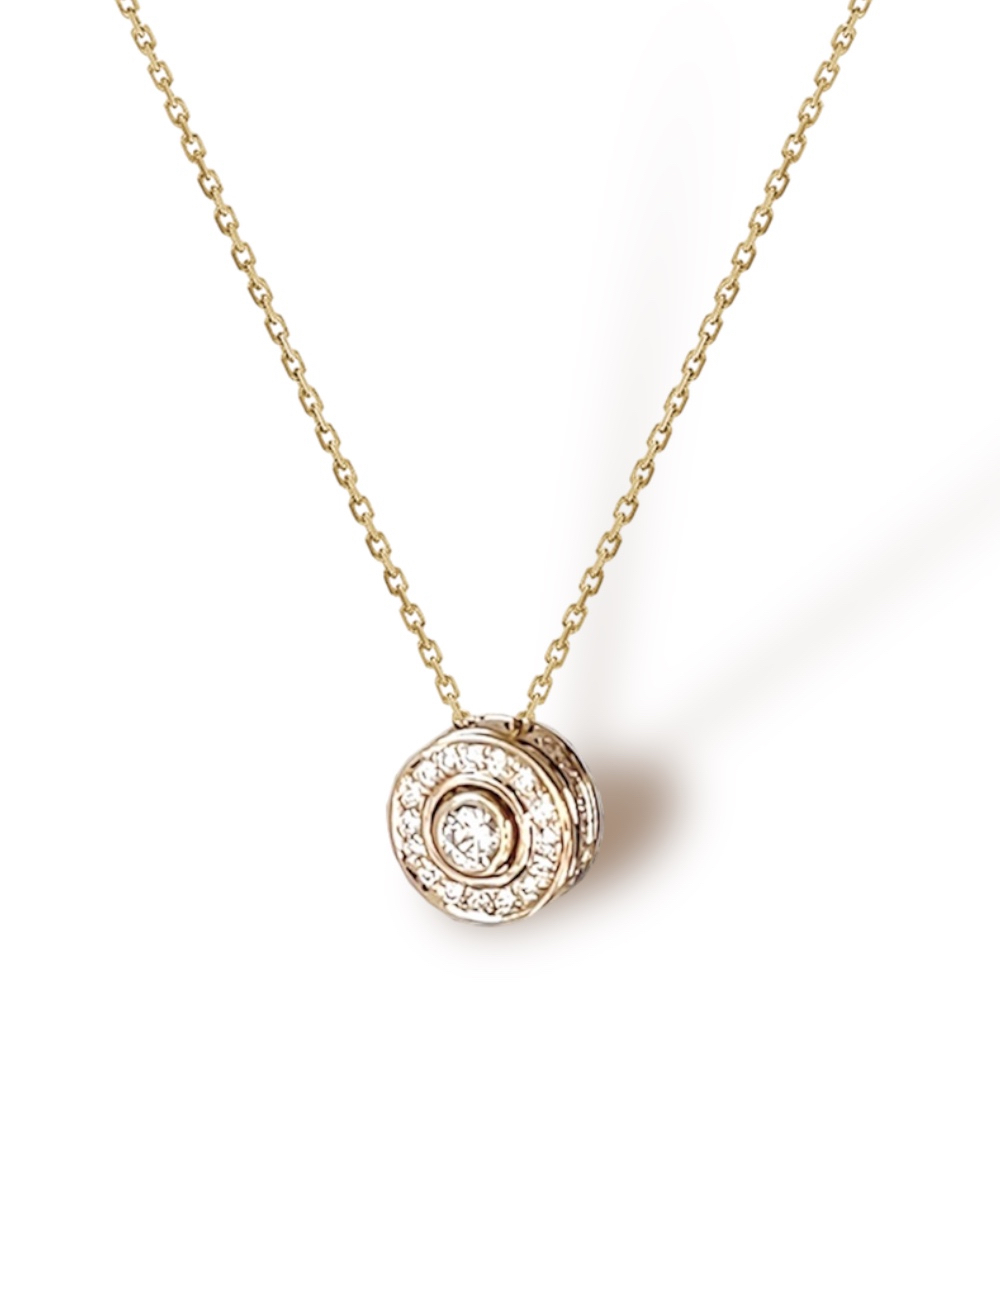 D.Bachet's Life Necklace: Central 0.20ct white diamond with halo & life flower design.